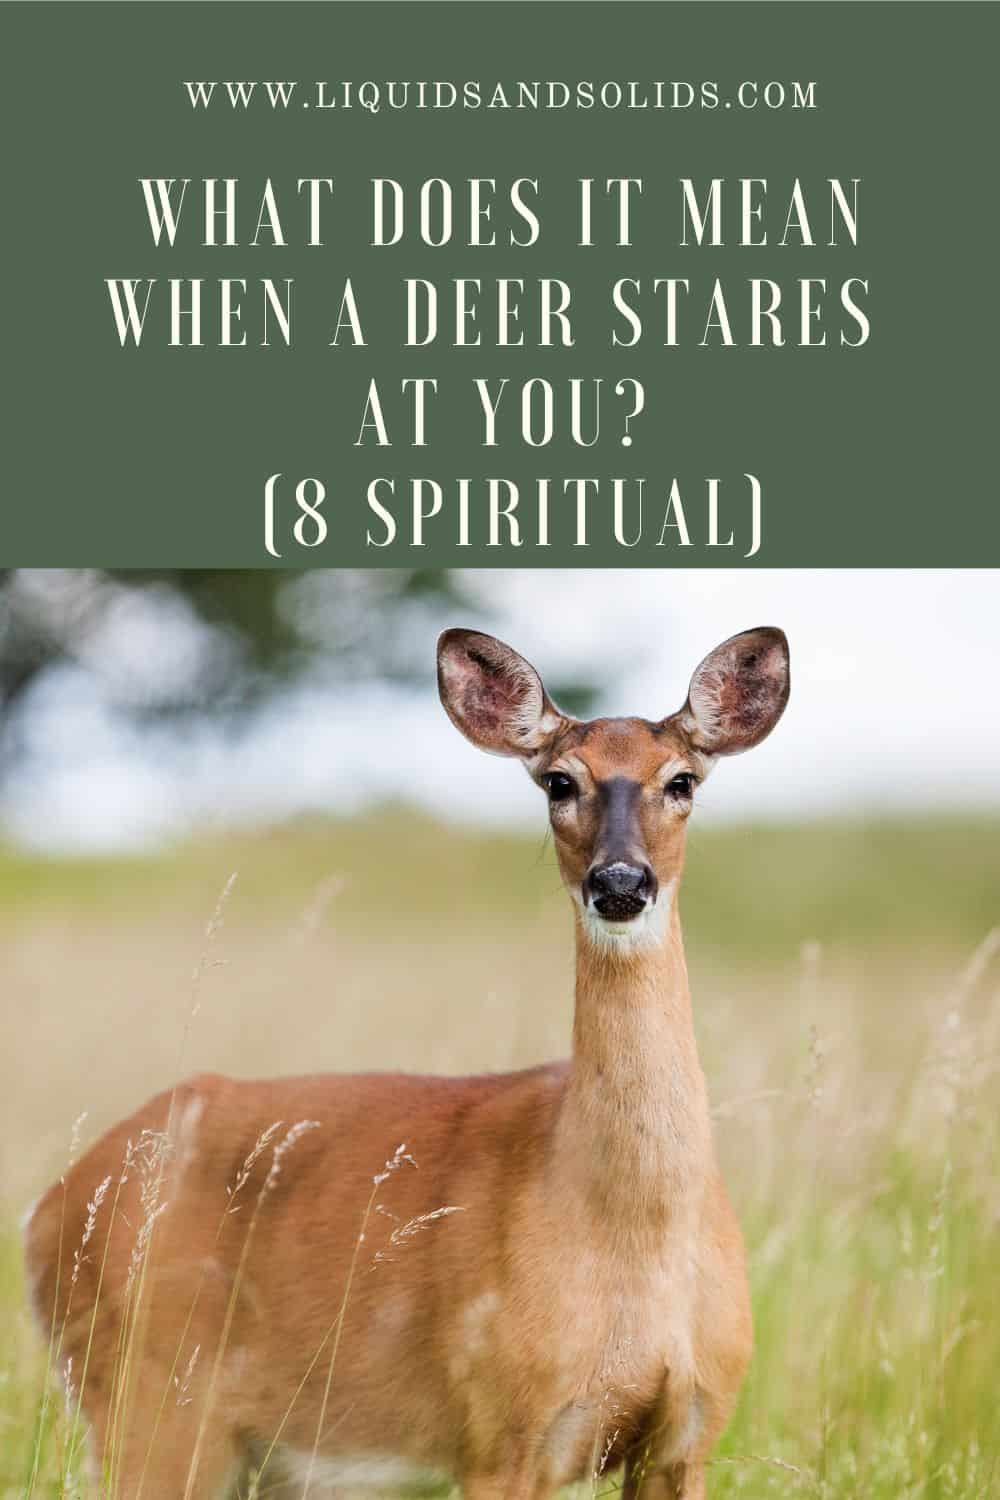 When a deer stares at you